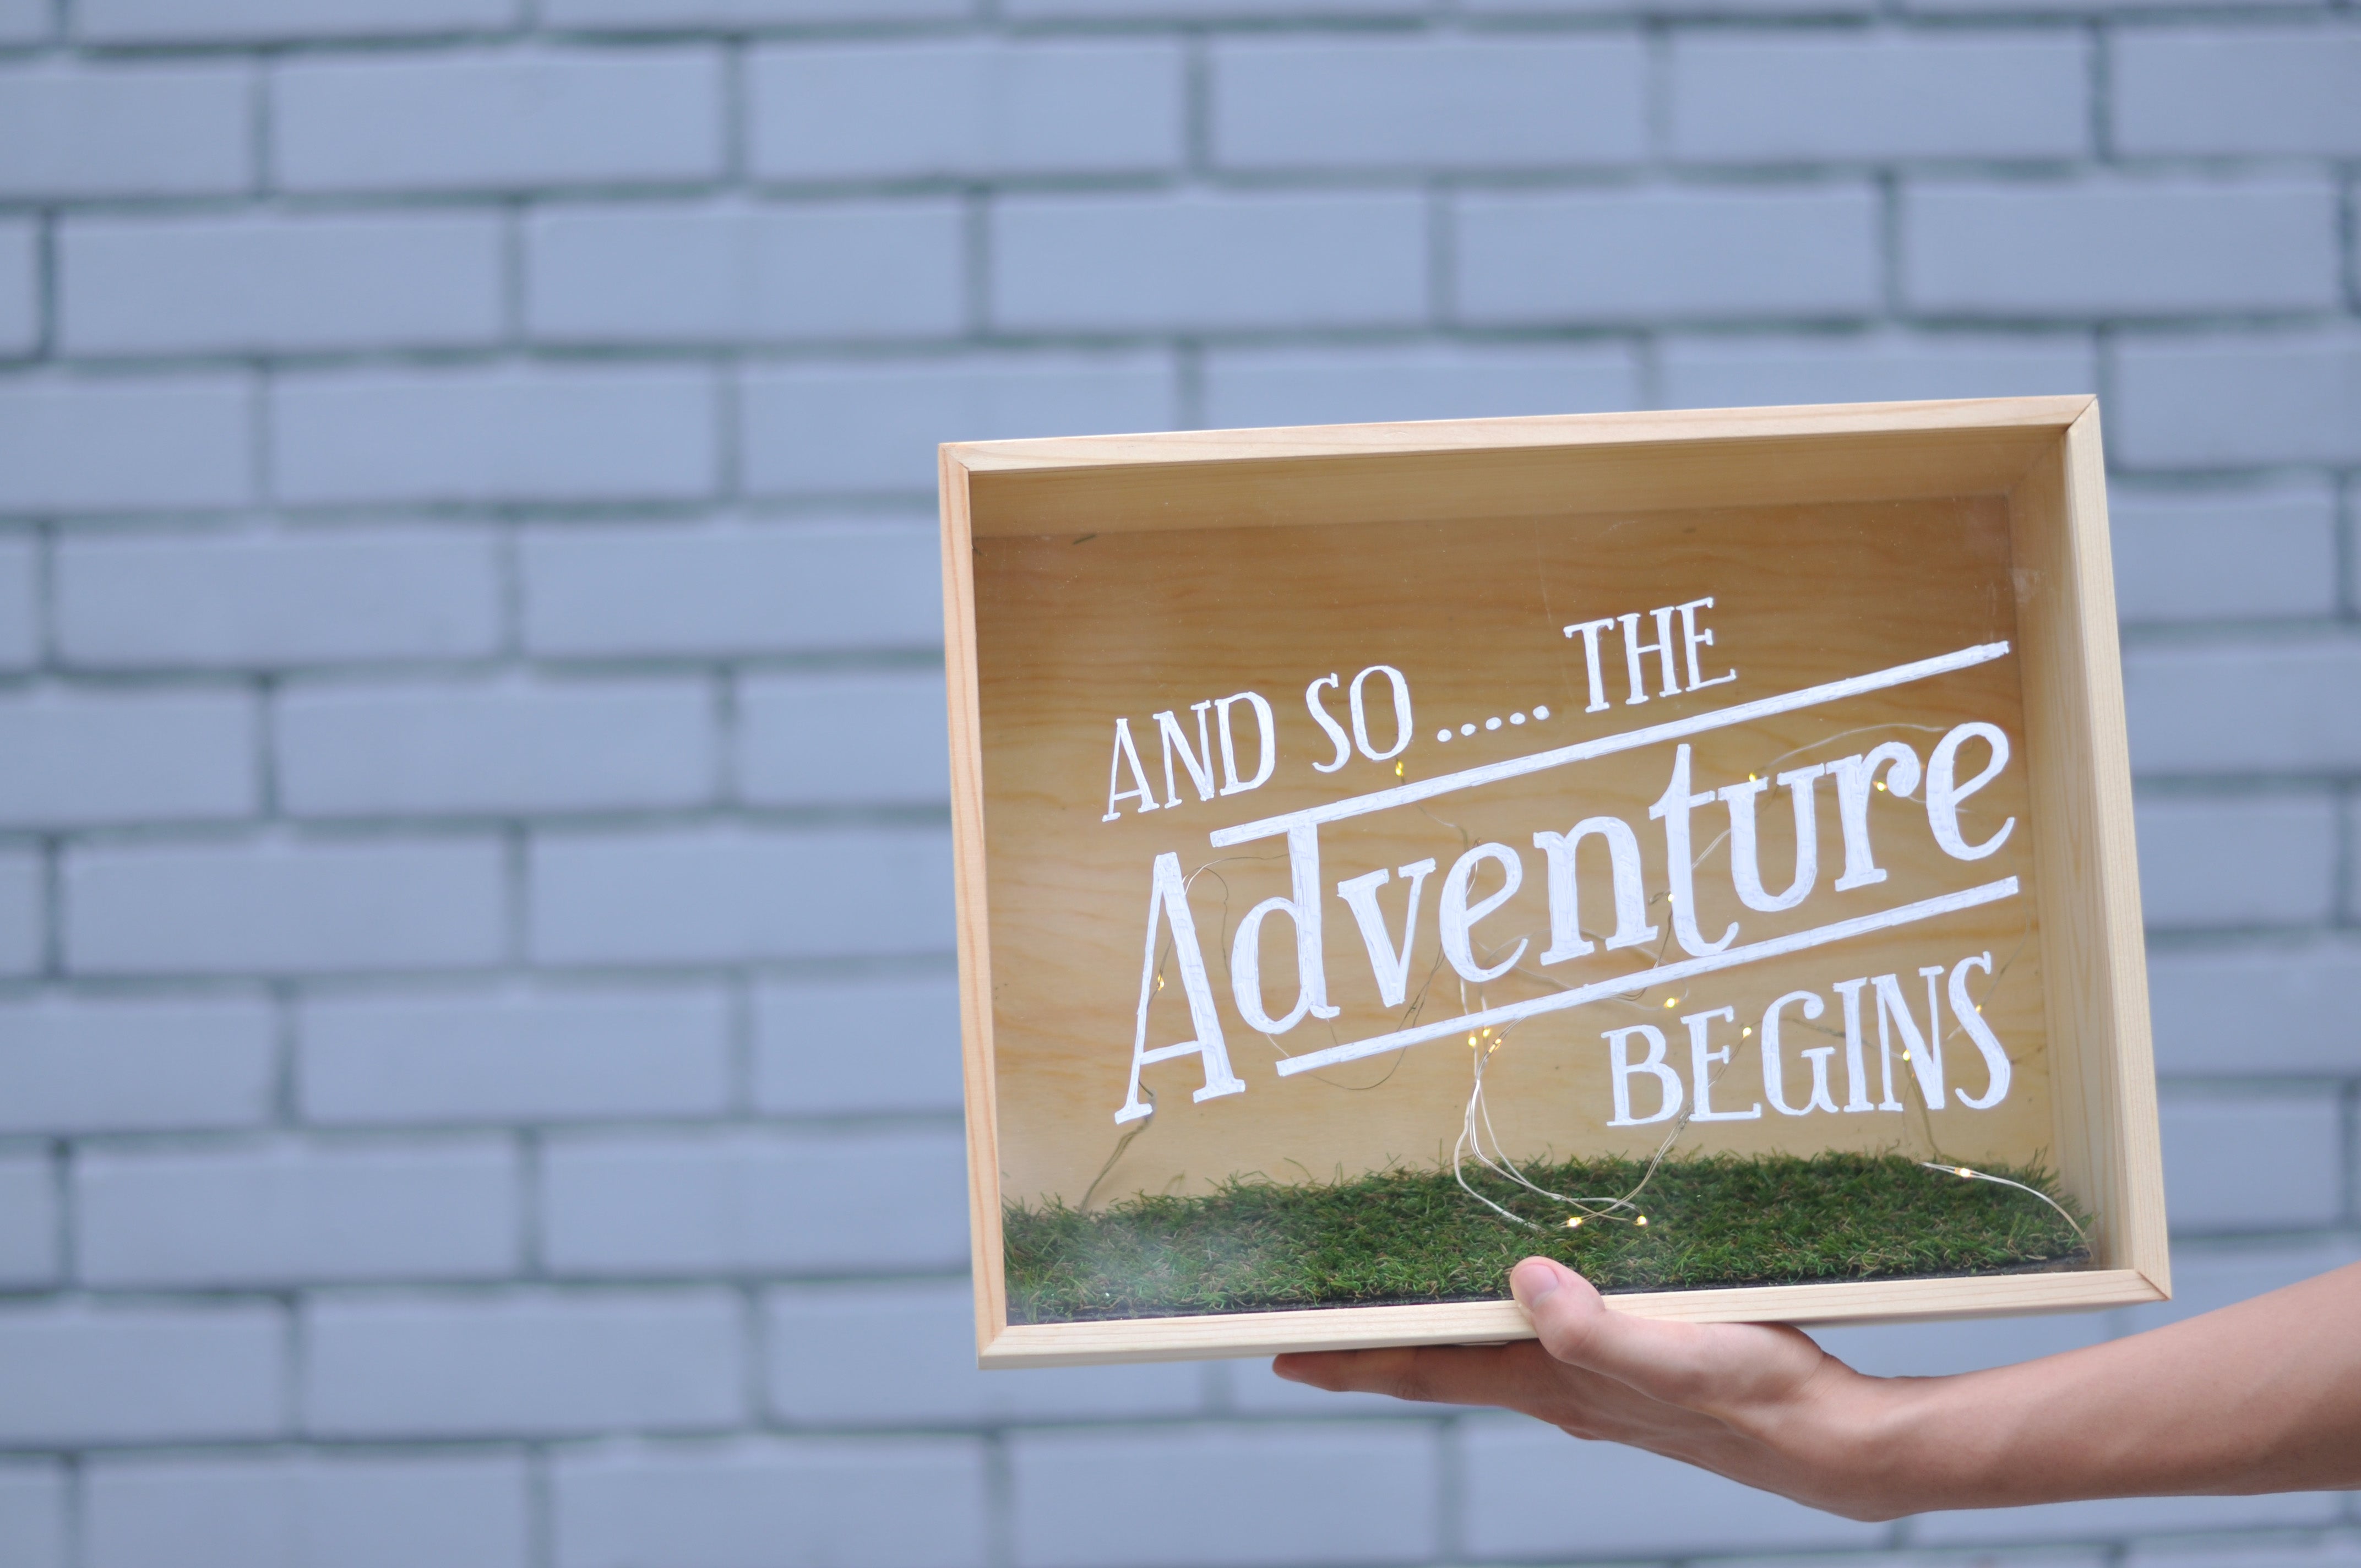 Shadow Box - And so... the adventure begins